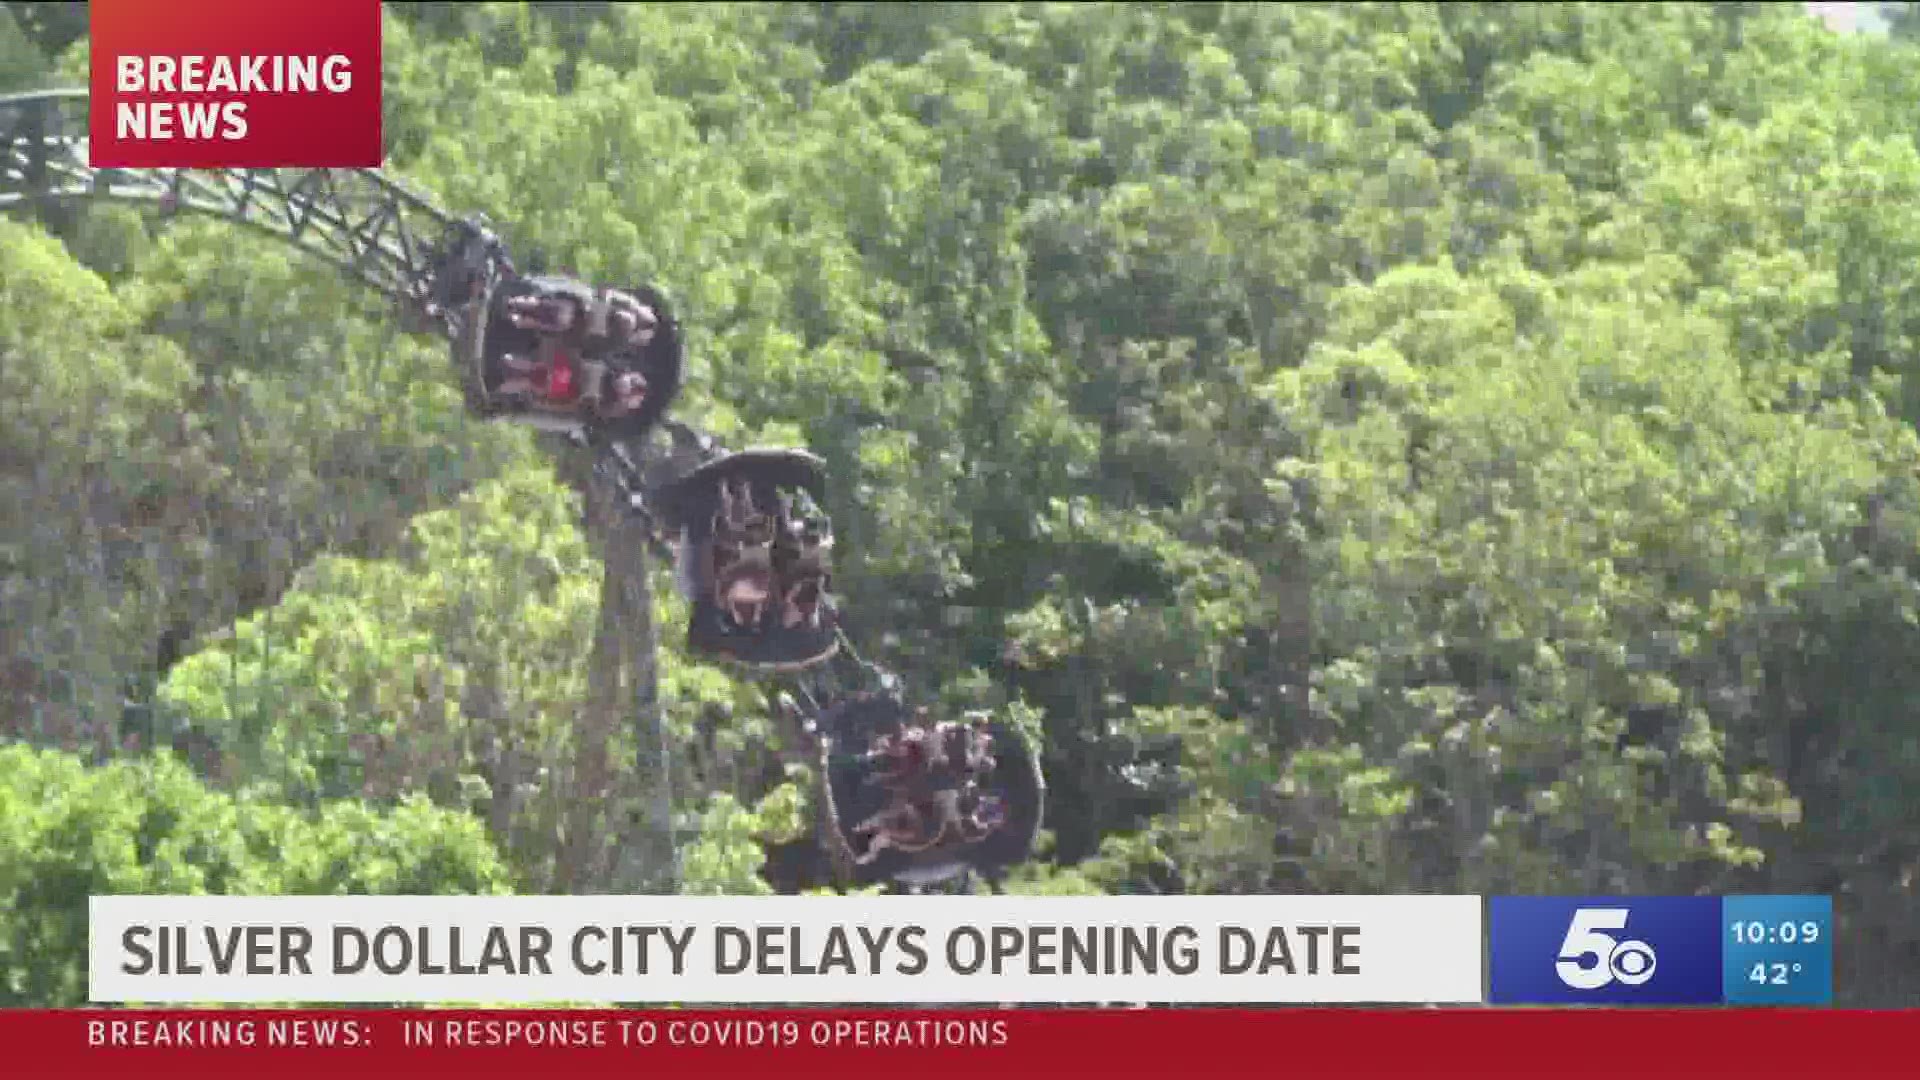 Silver Dollar City delays opening date